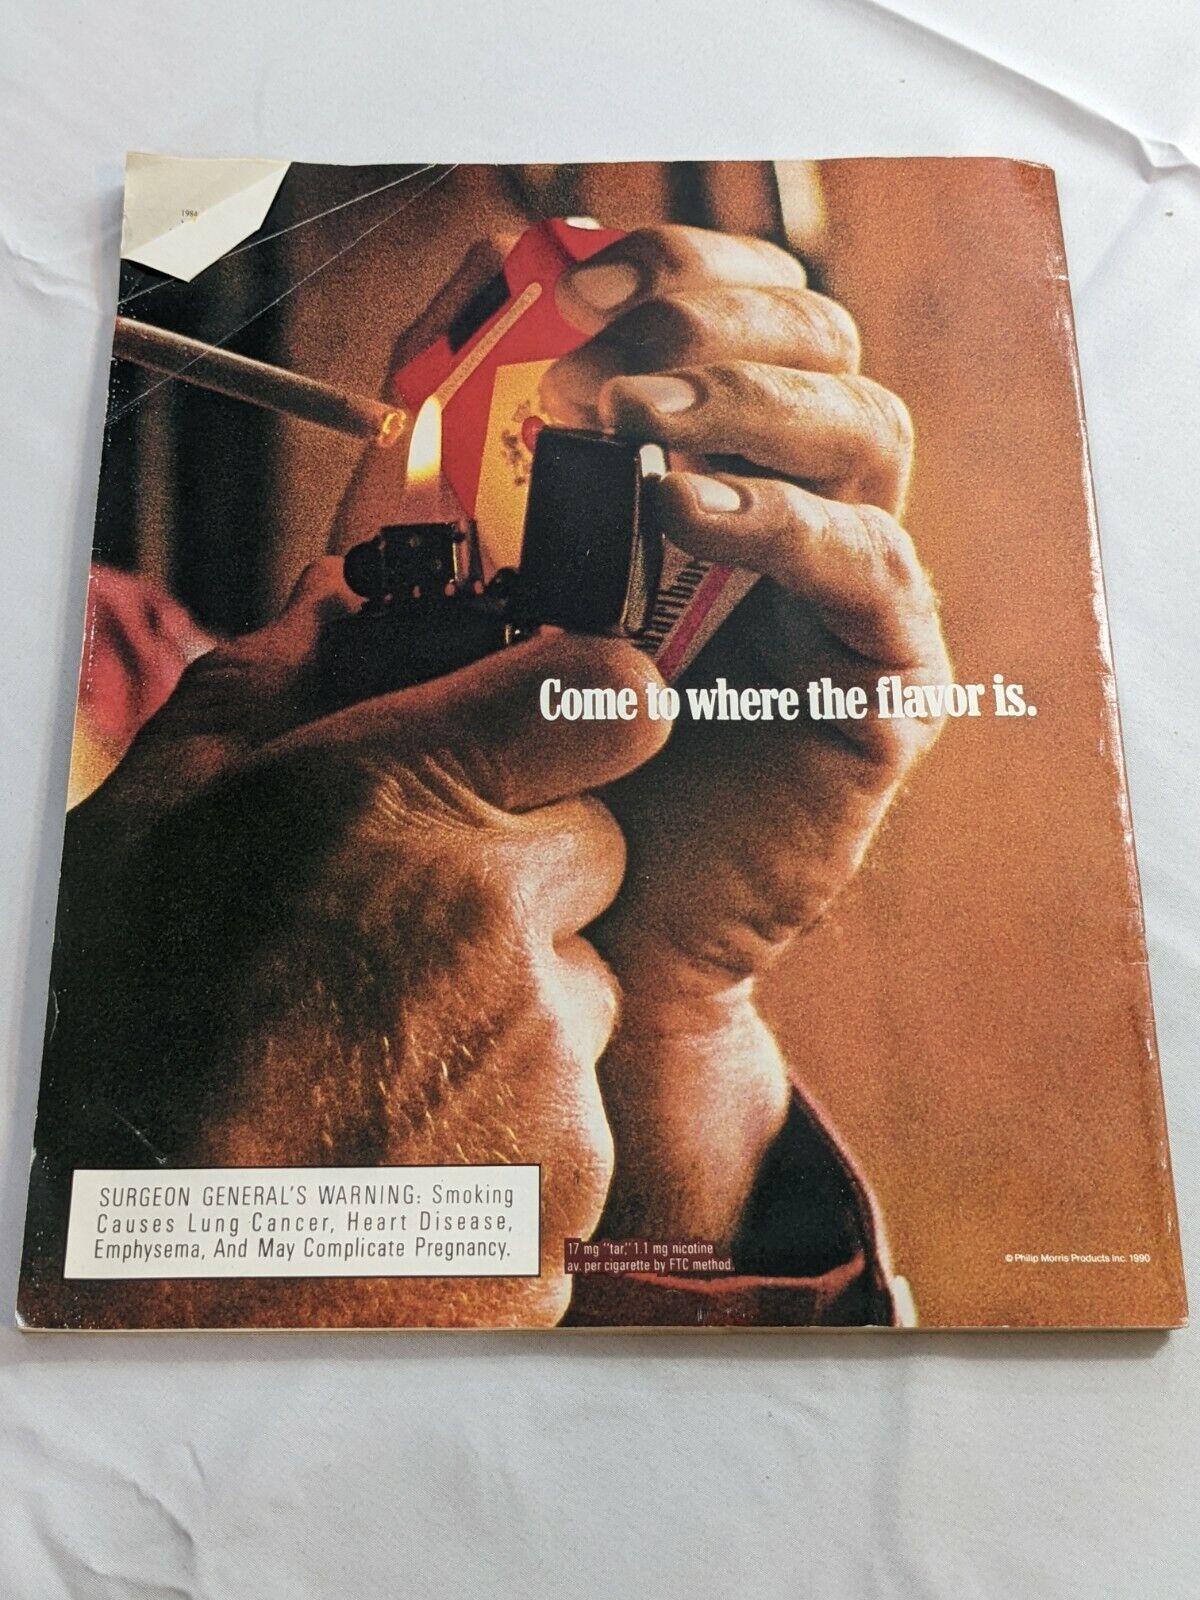 Sports Illustrated Special Issue - 35 years of Covers Magazine Collectible